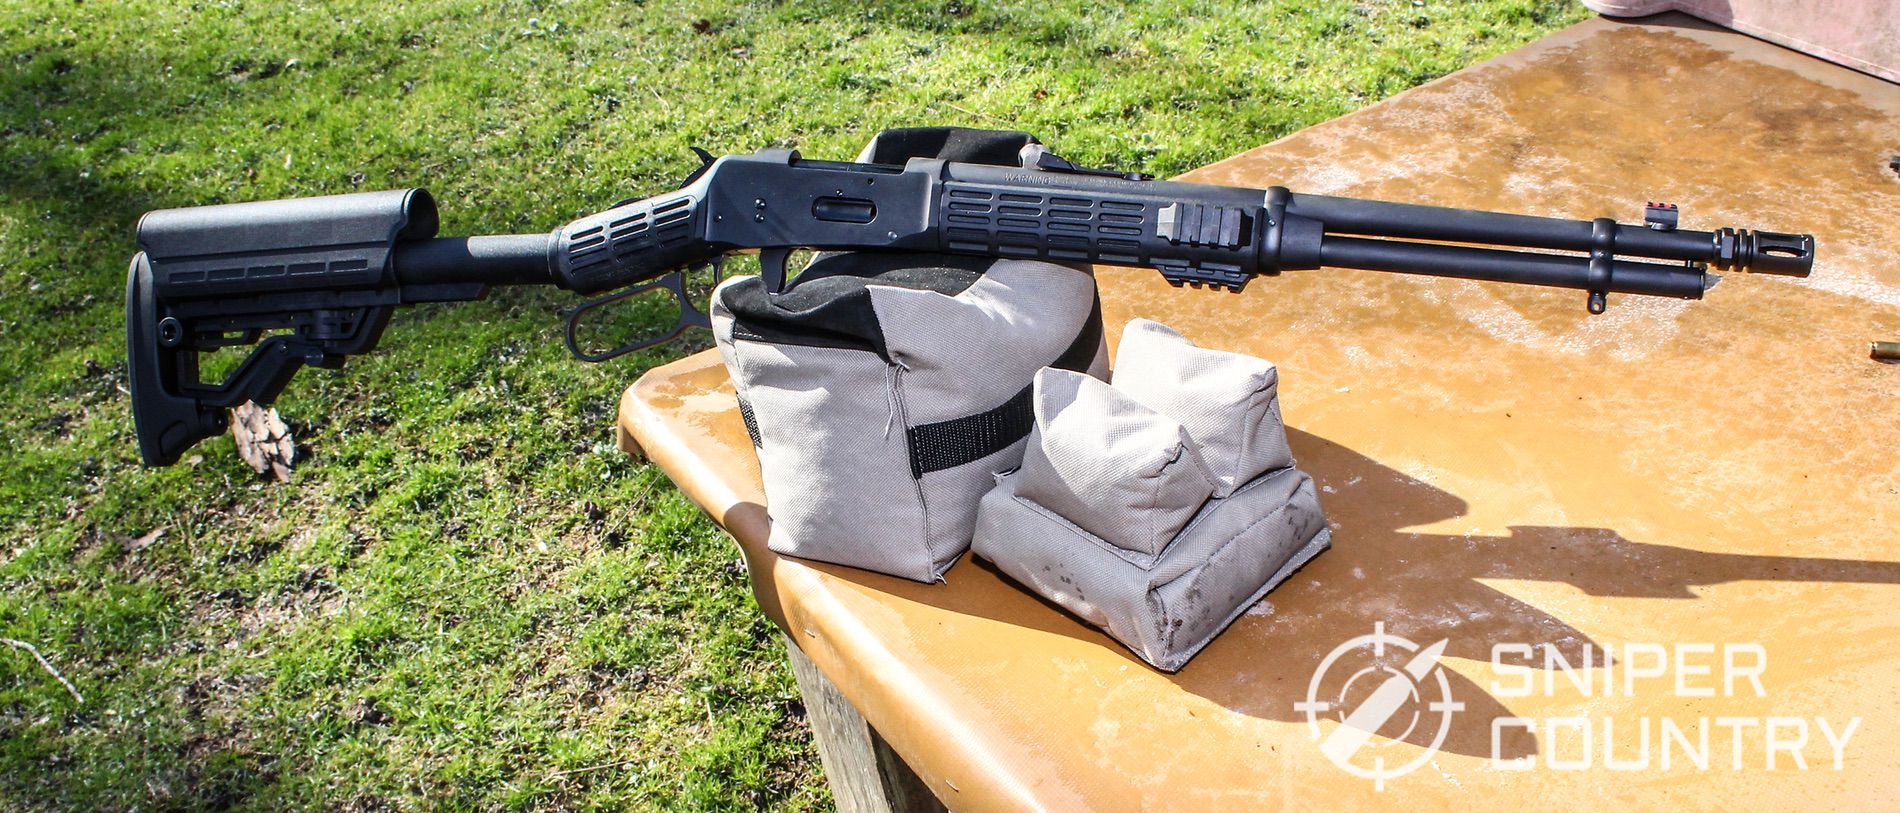 Title shot of the Mossberg 464 SPX on the gun bag